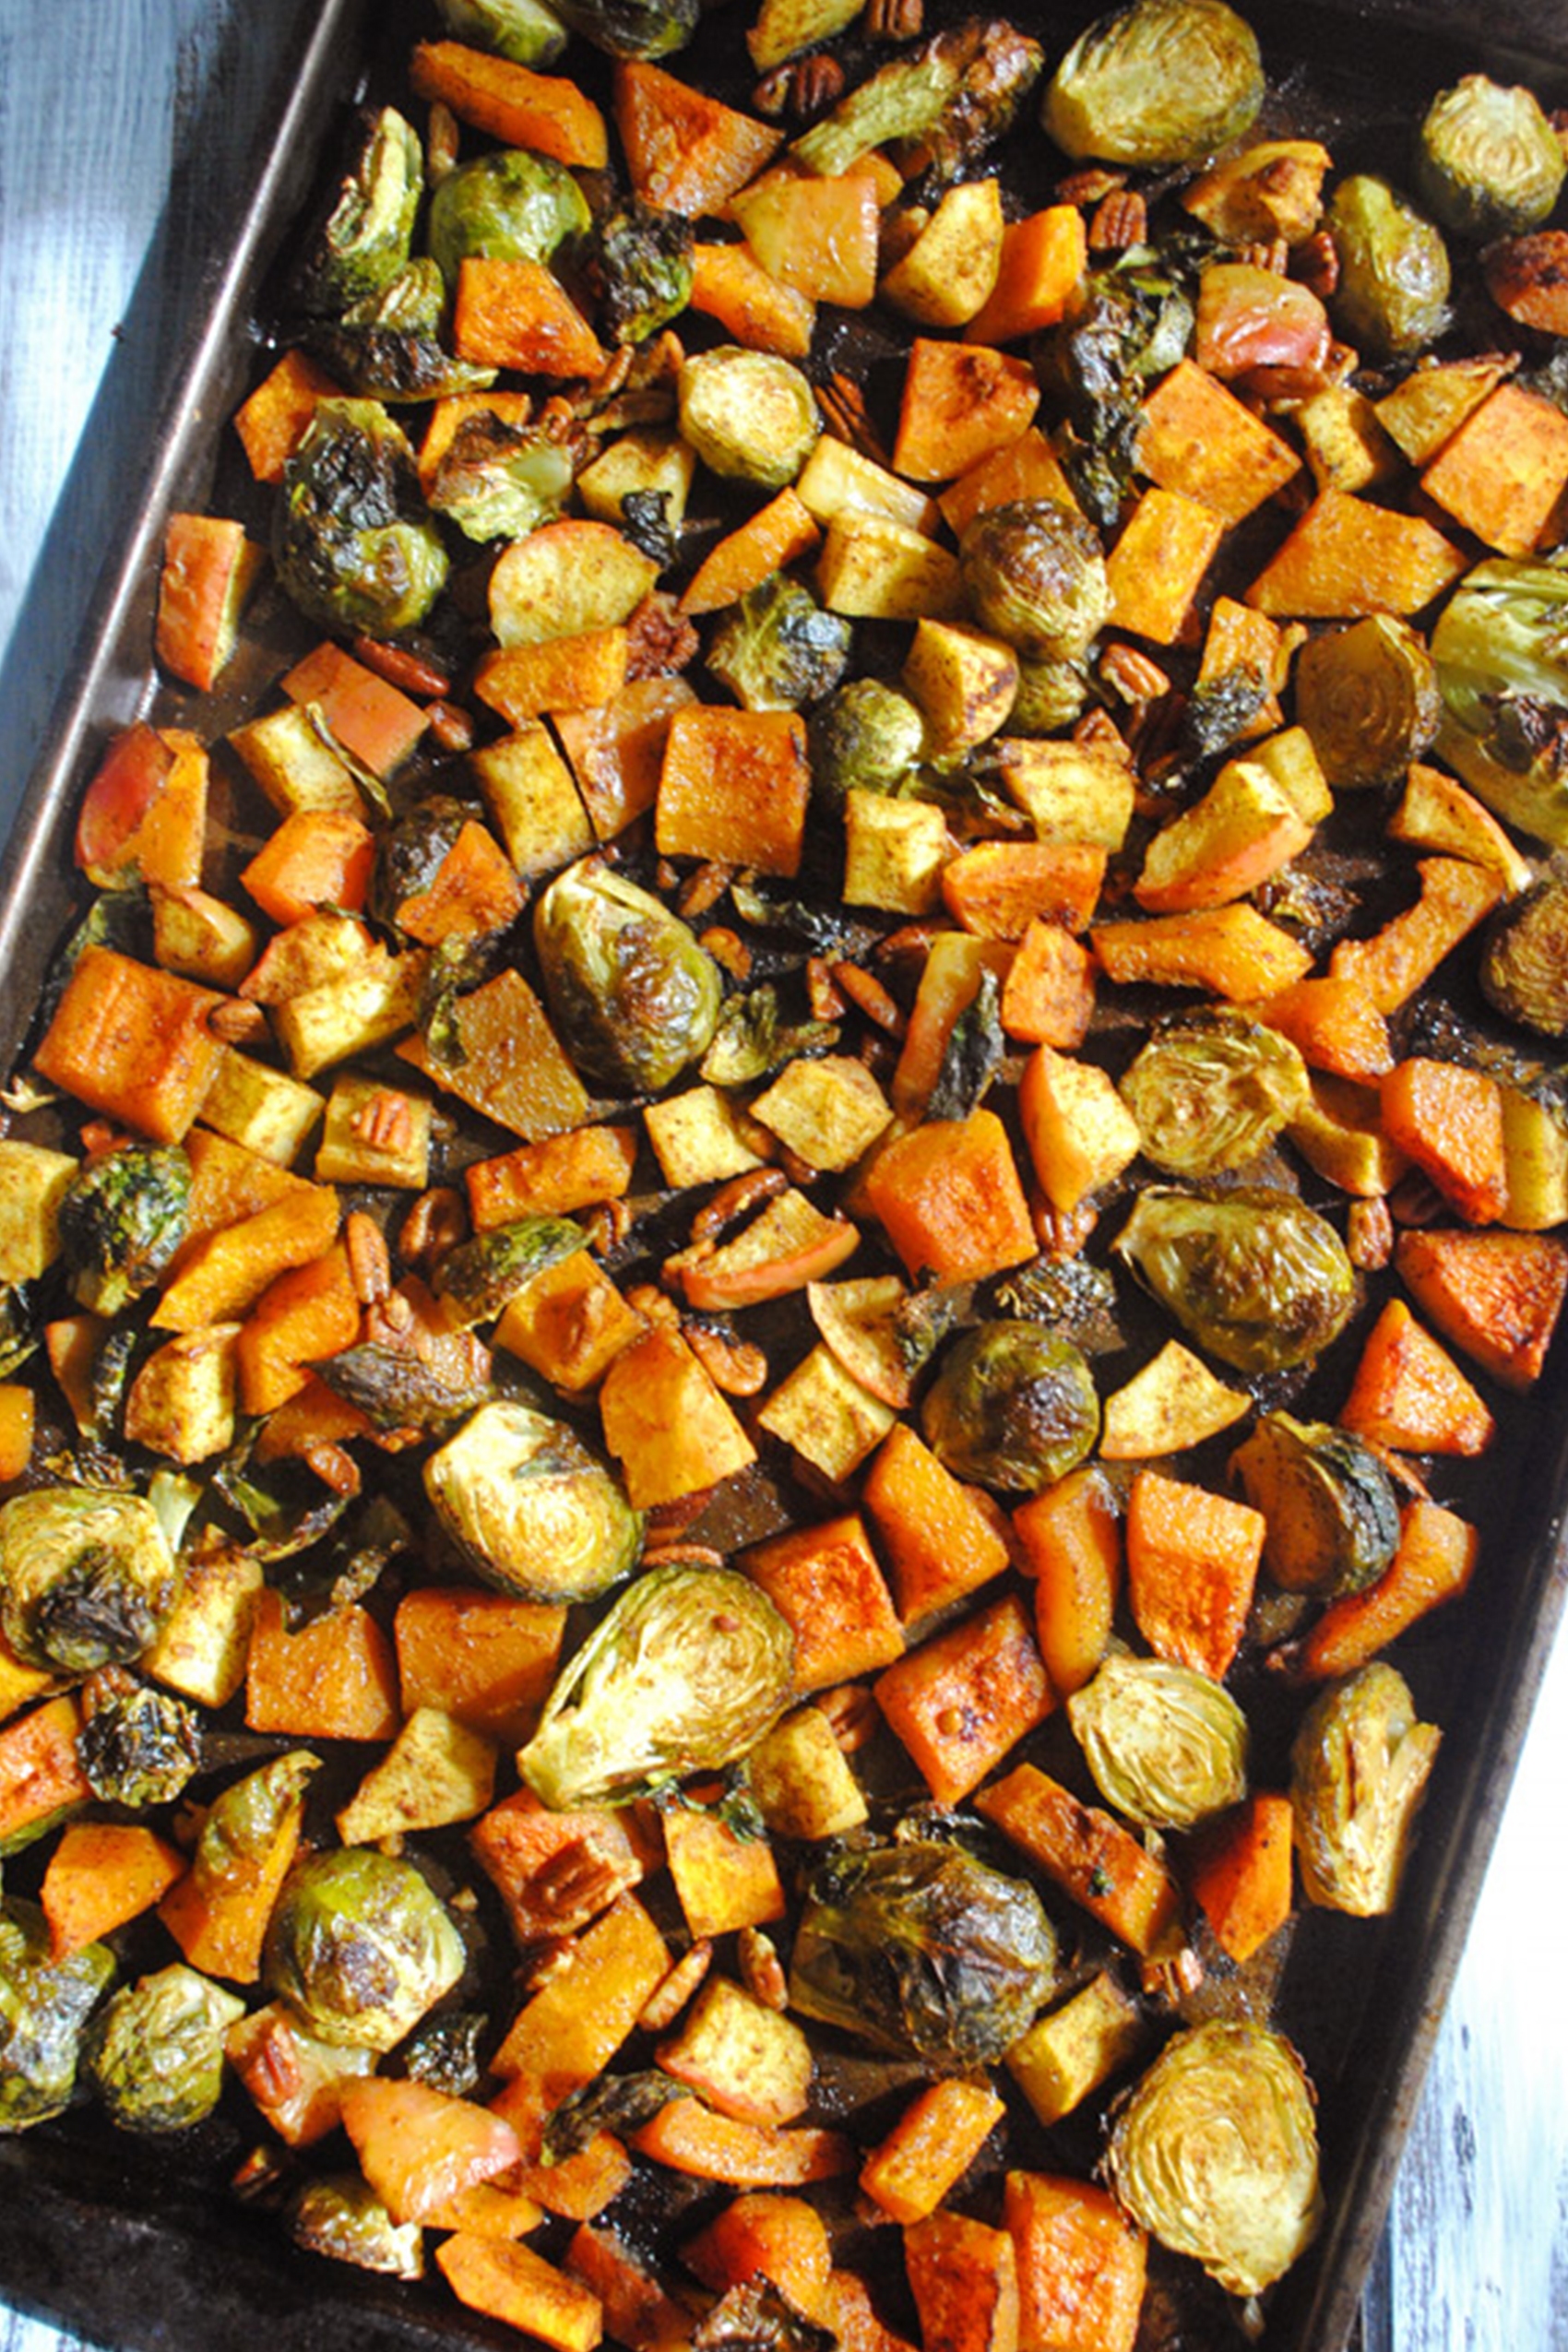 a sheet tray of roasted vegetables including brussels sprouts, squash, apples and pecans